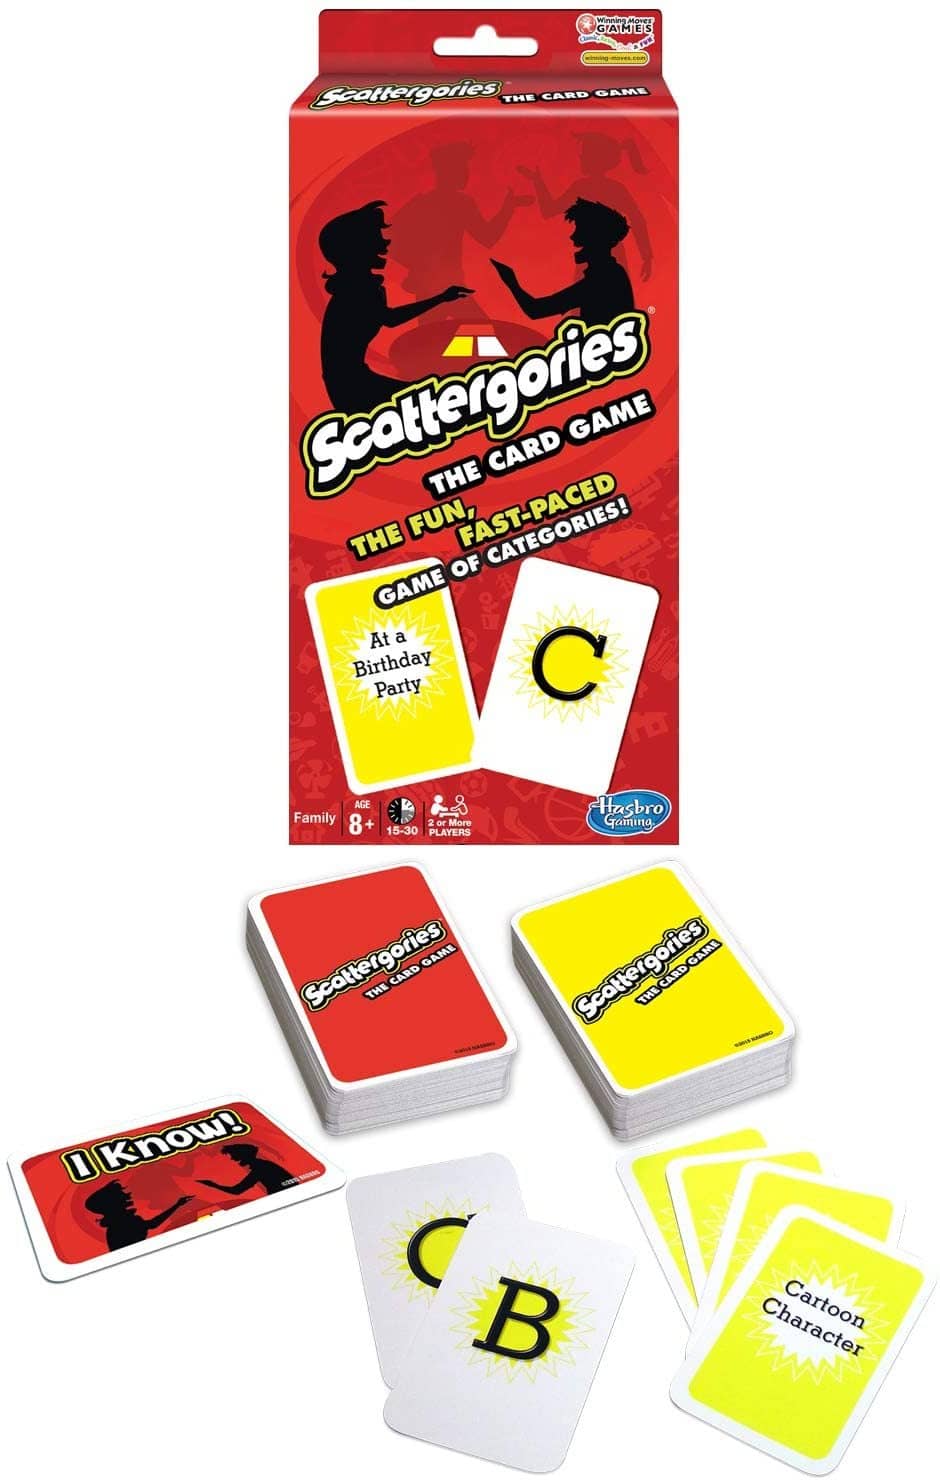 Qwixx The Card Game  A Fast Family Card Game